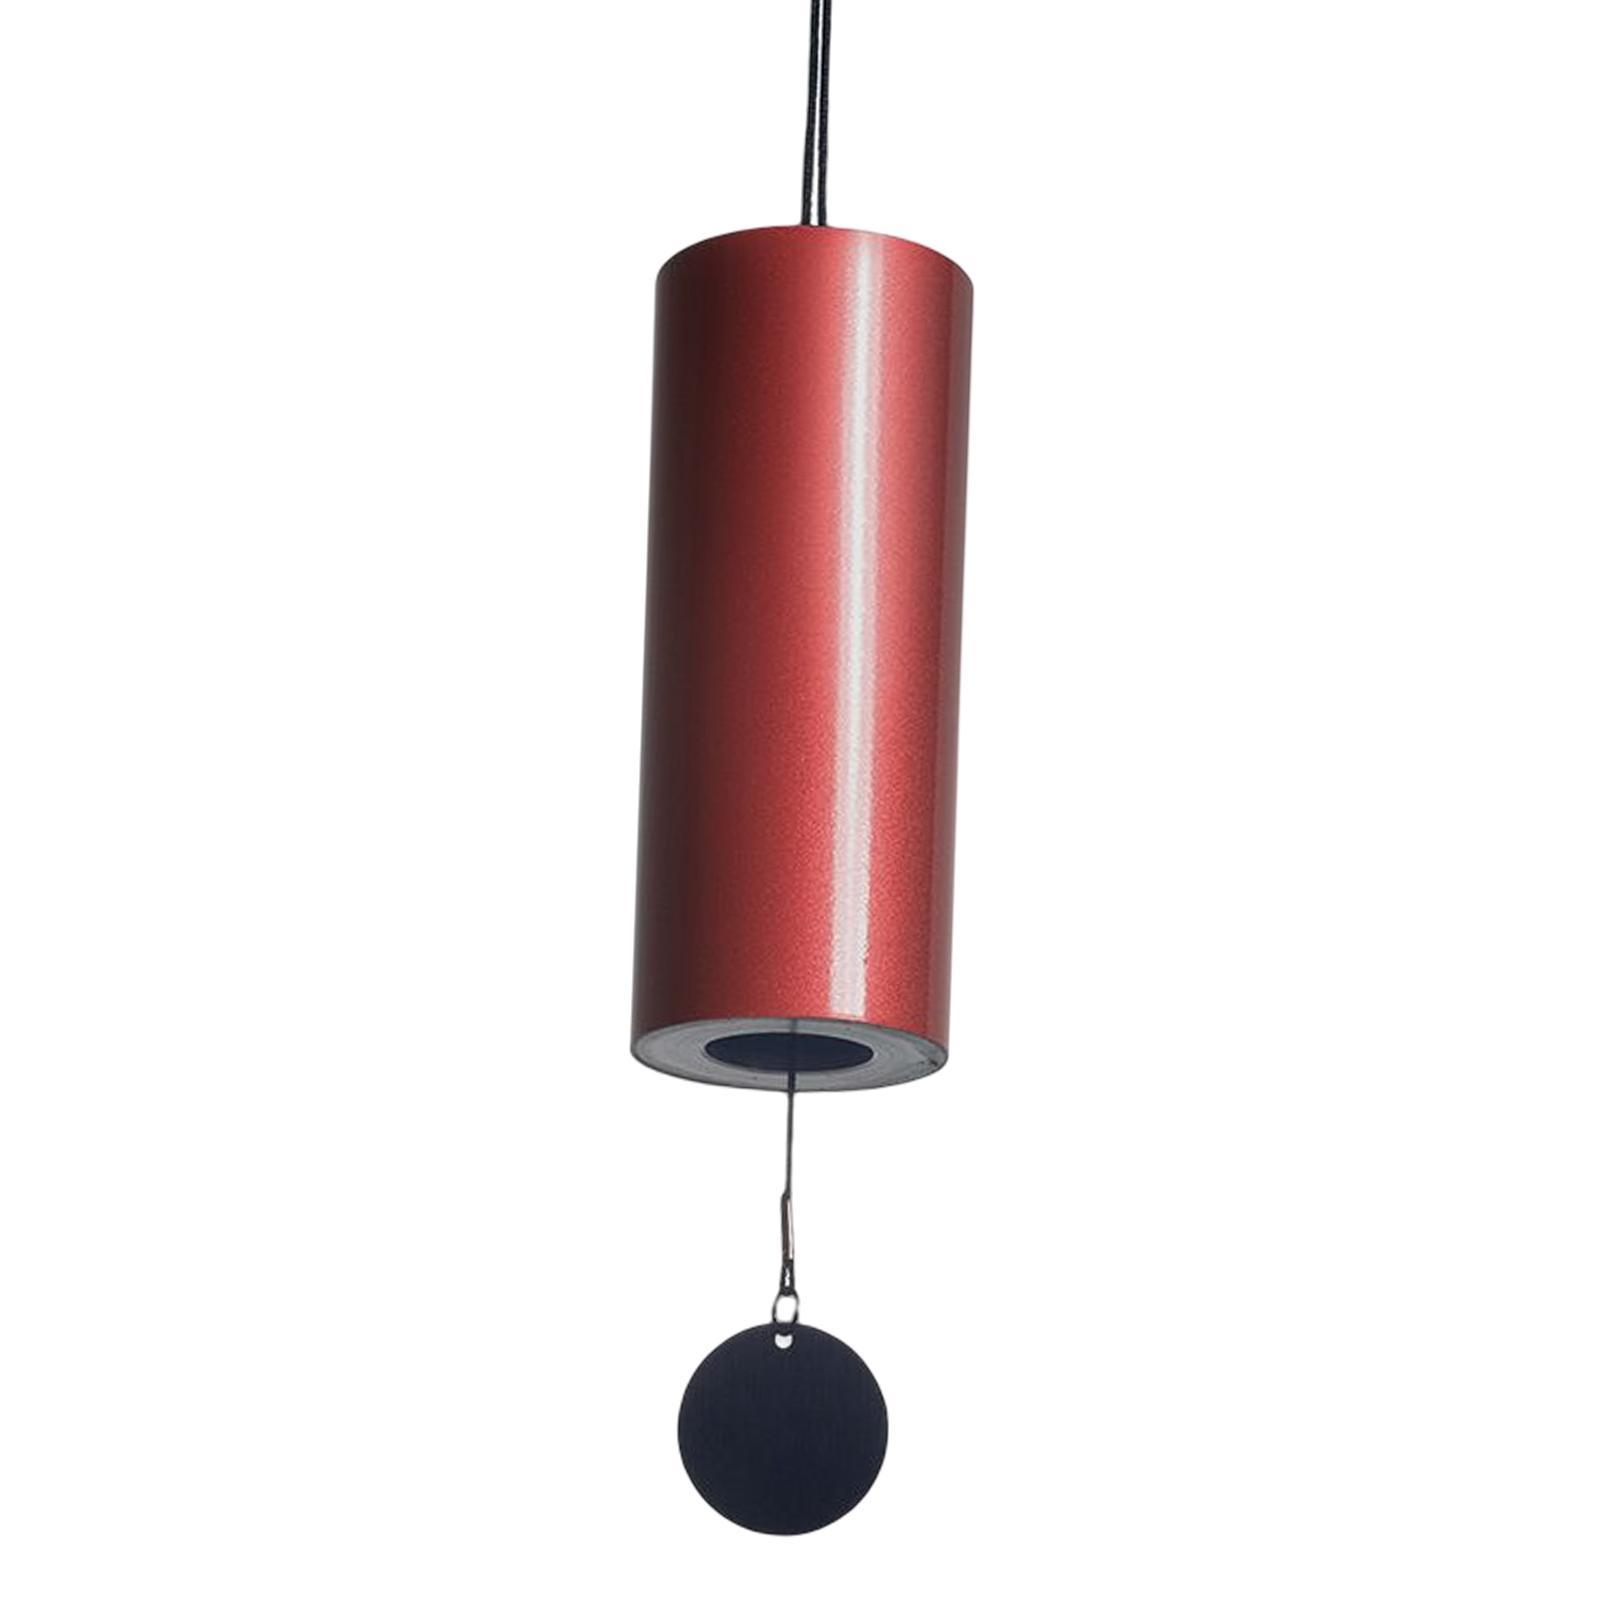 Retro Wind Chime Antique Soothing Melody for Outdoor Indoor Home Ornament